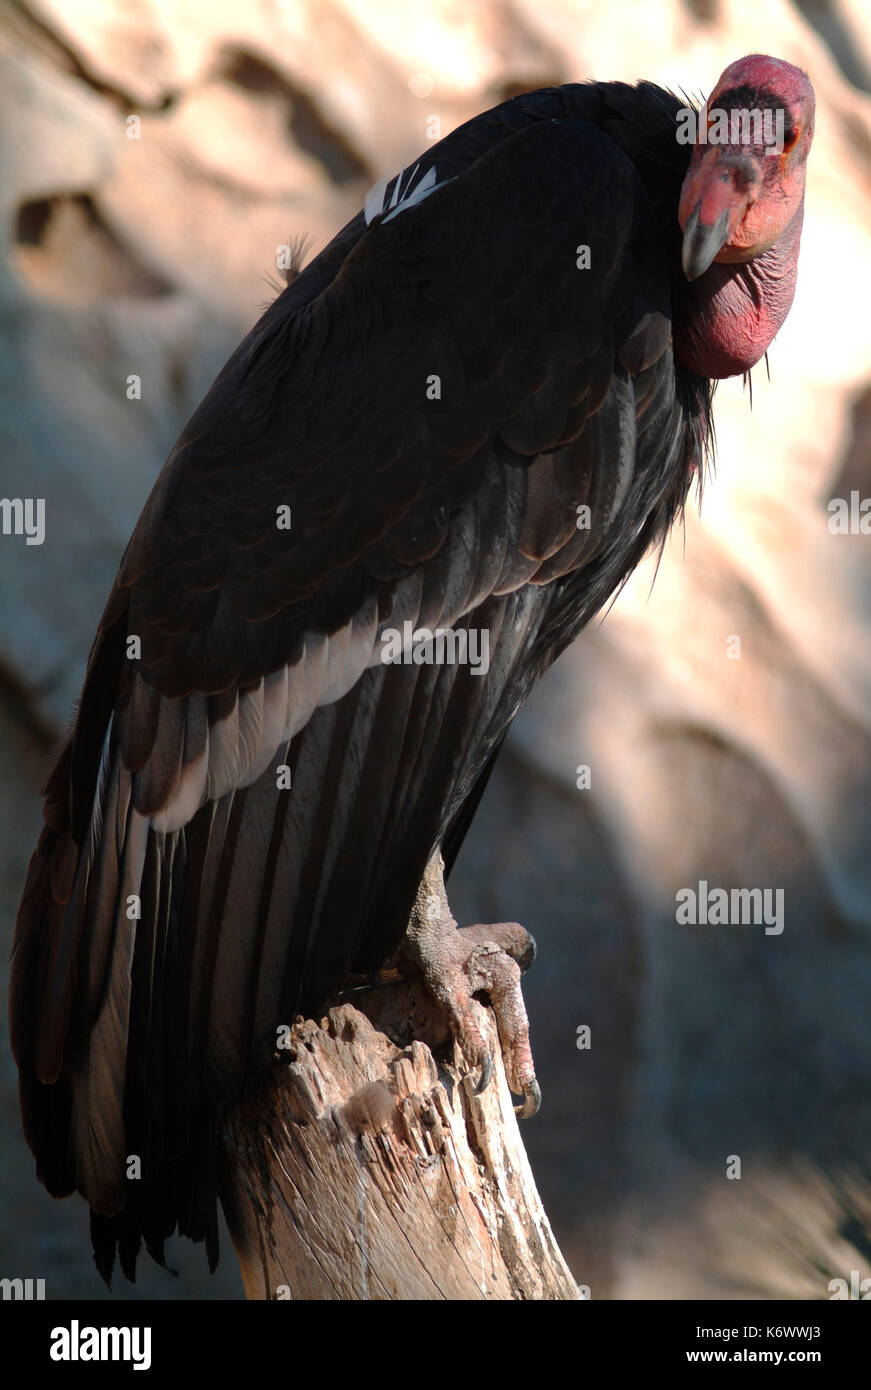 California Condor, Gymnogyps californianus, captive, Critically Endangered by the IUCN Red List, and listed on Appendix I of CITES, New World vulture  Stock Photo